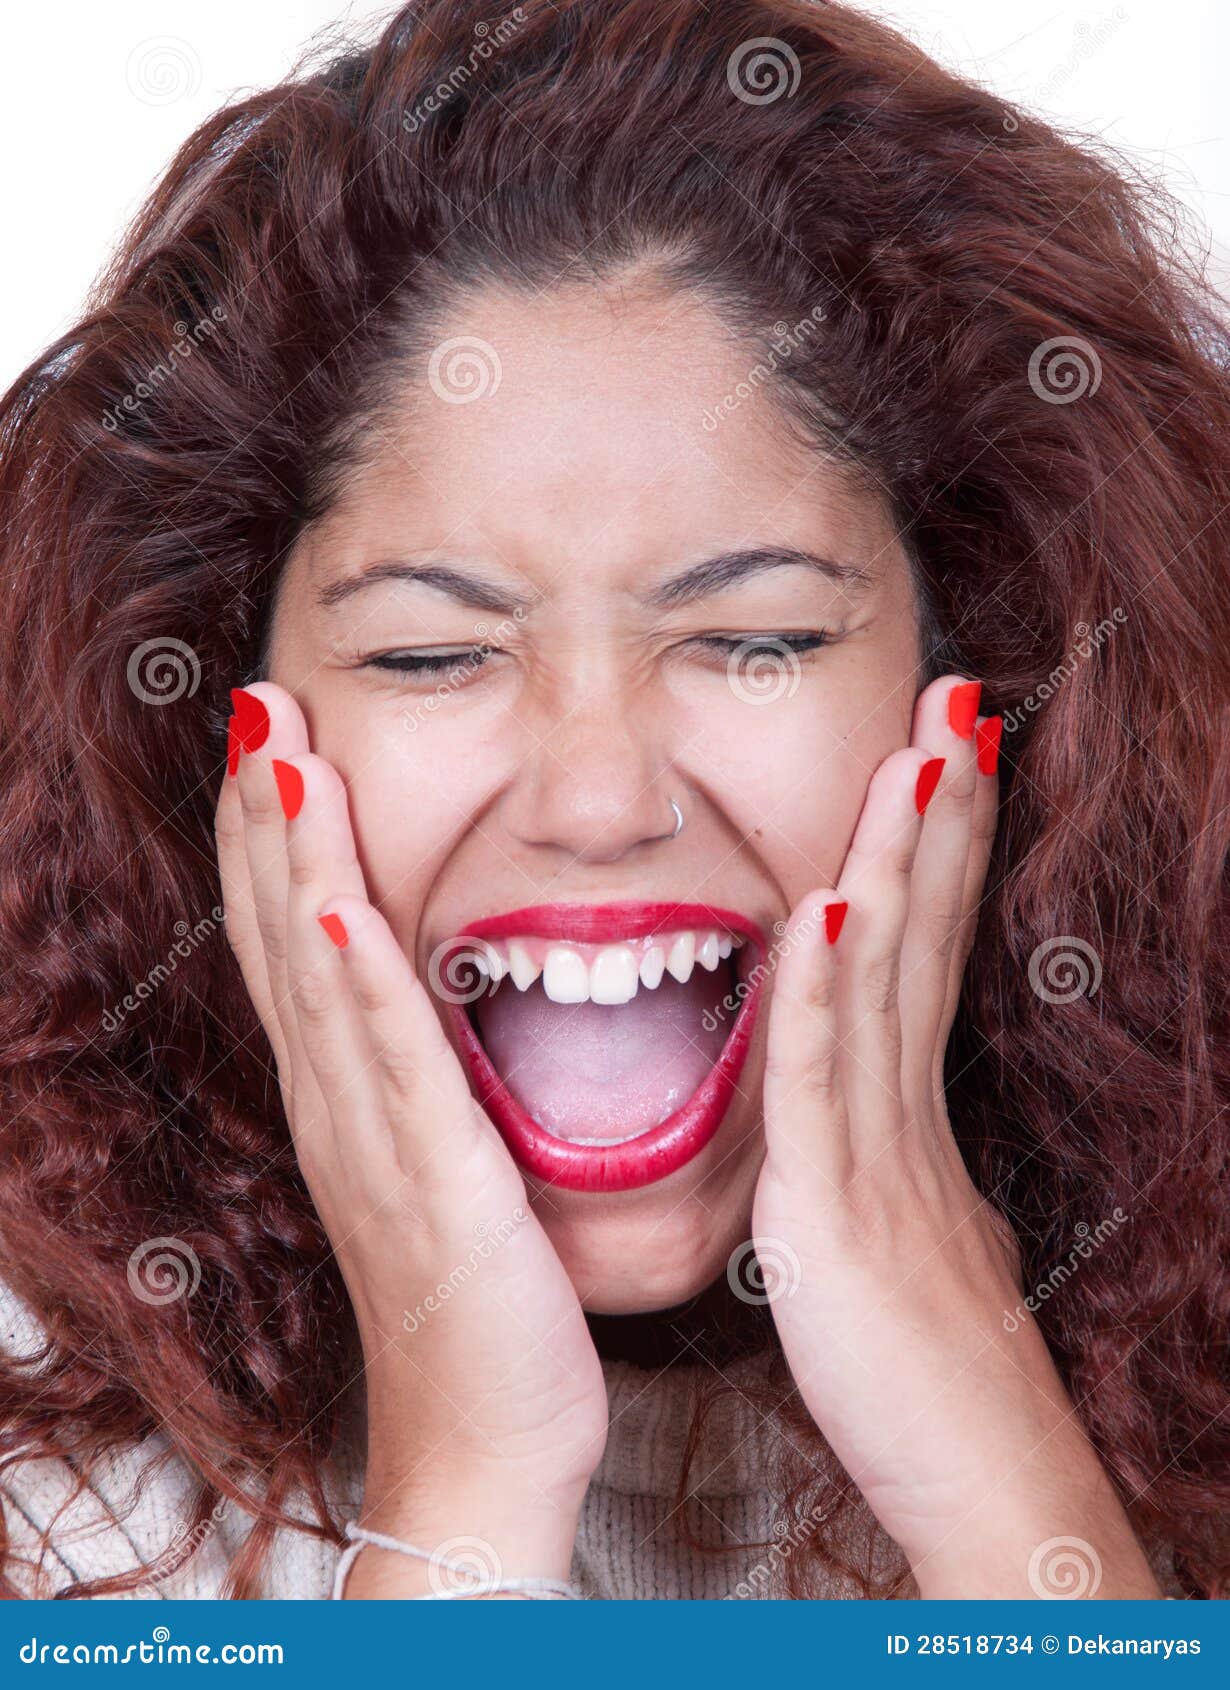 Scared face of girl stock photo. Image of madness, person - 28518734